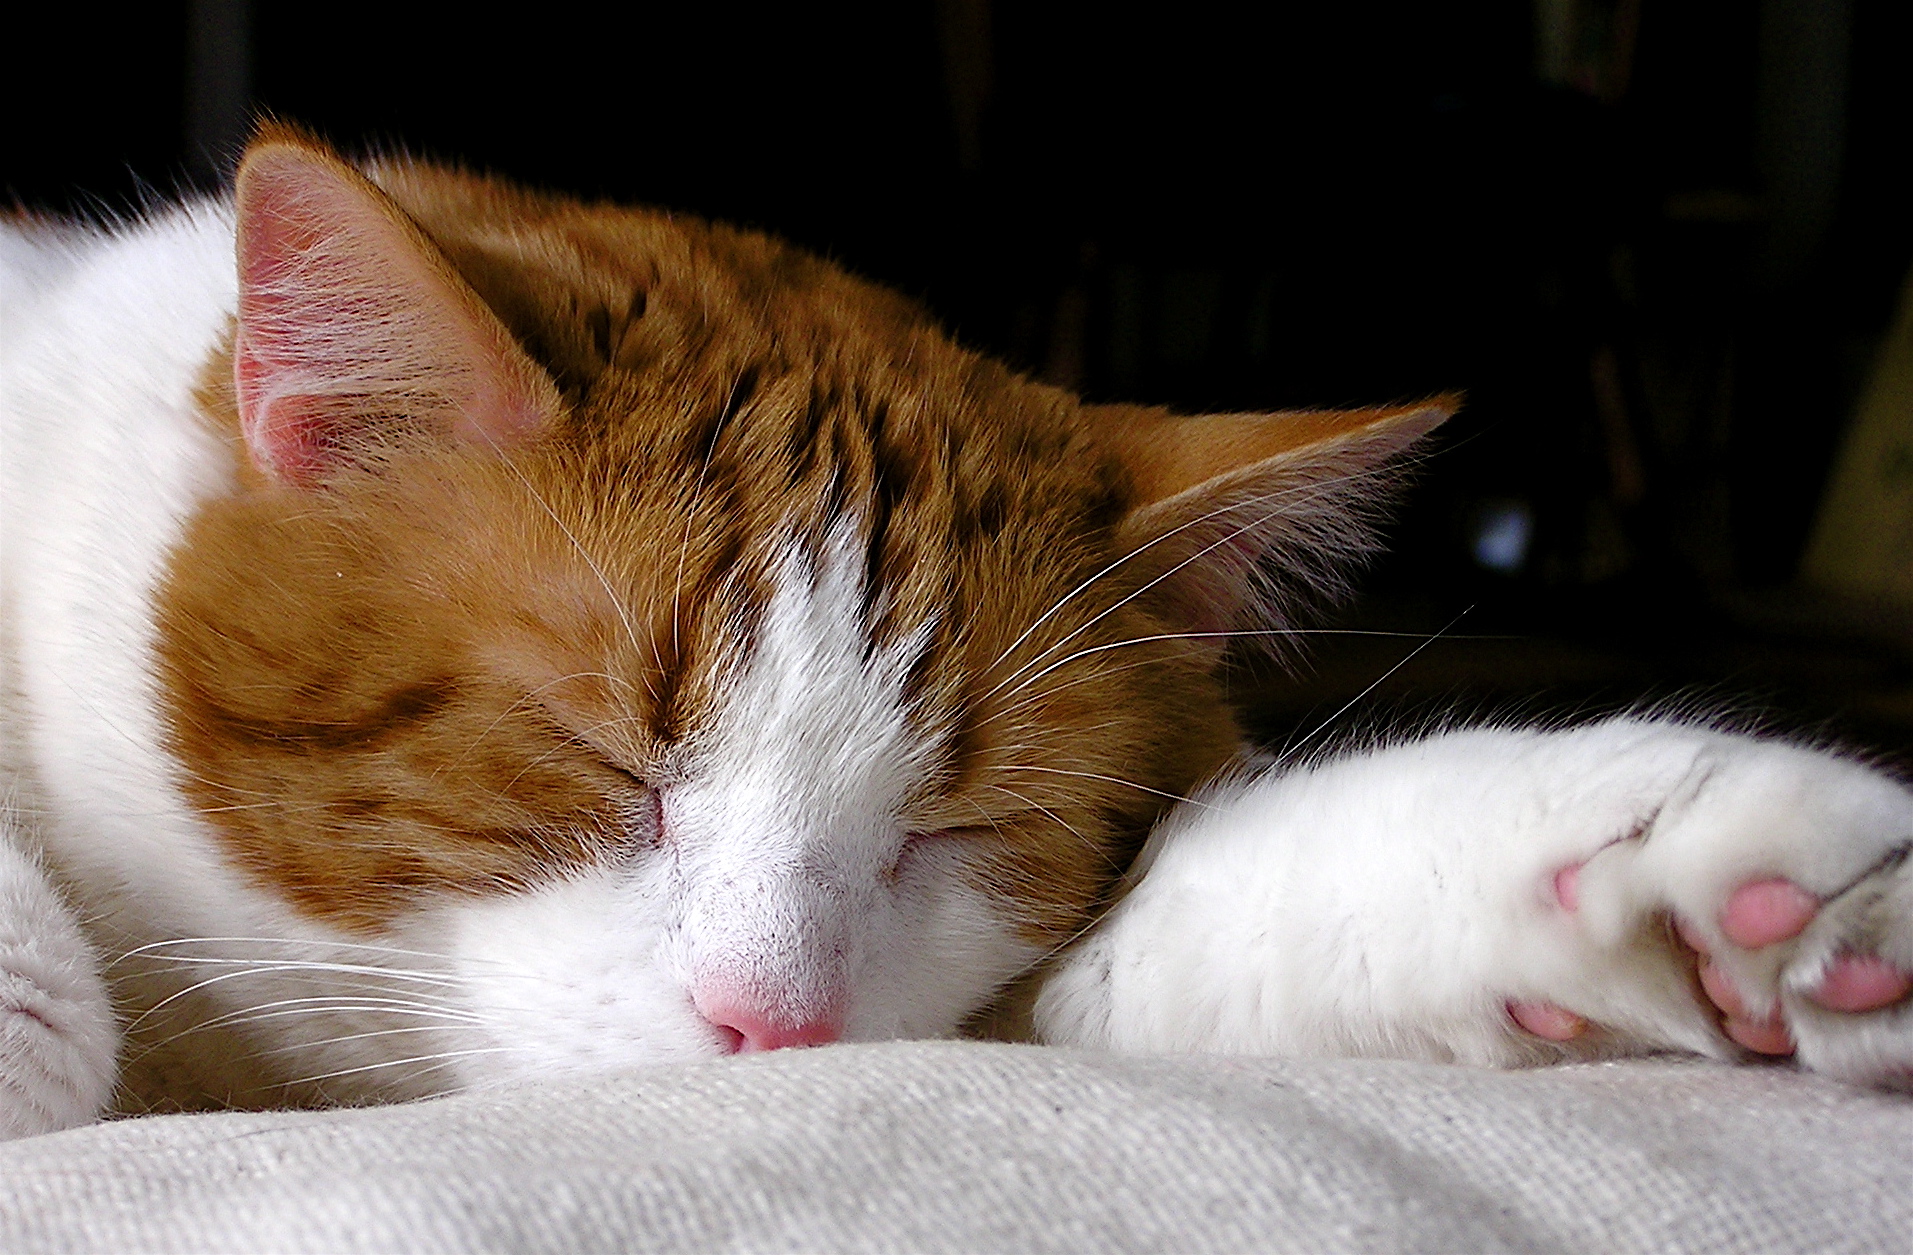 the orange and white cat is sleeping on a comforter